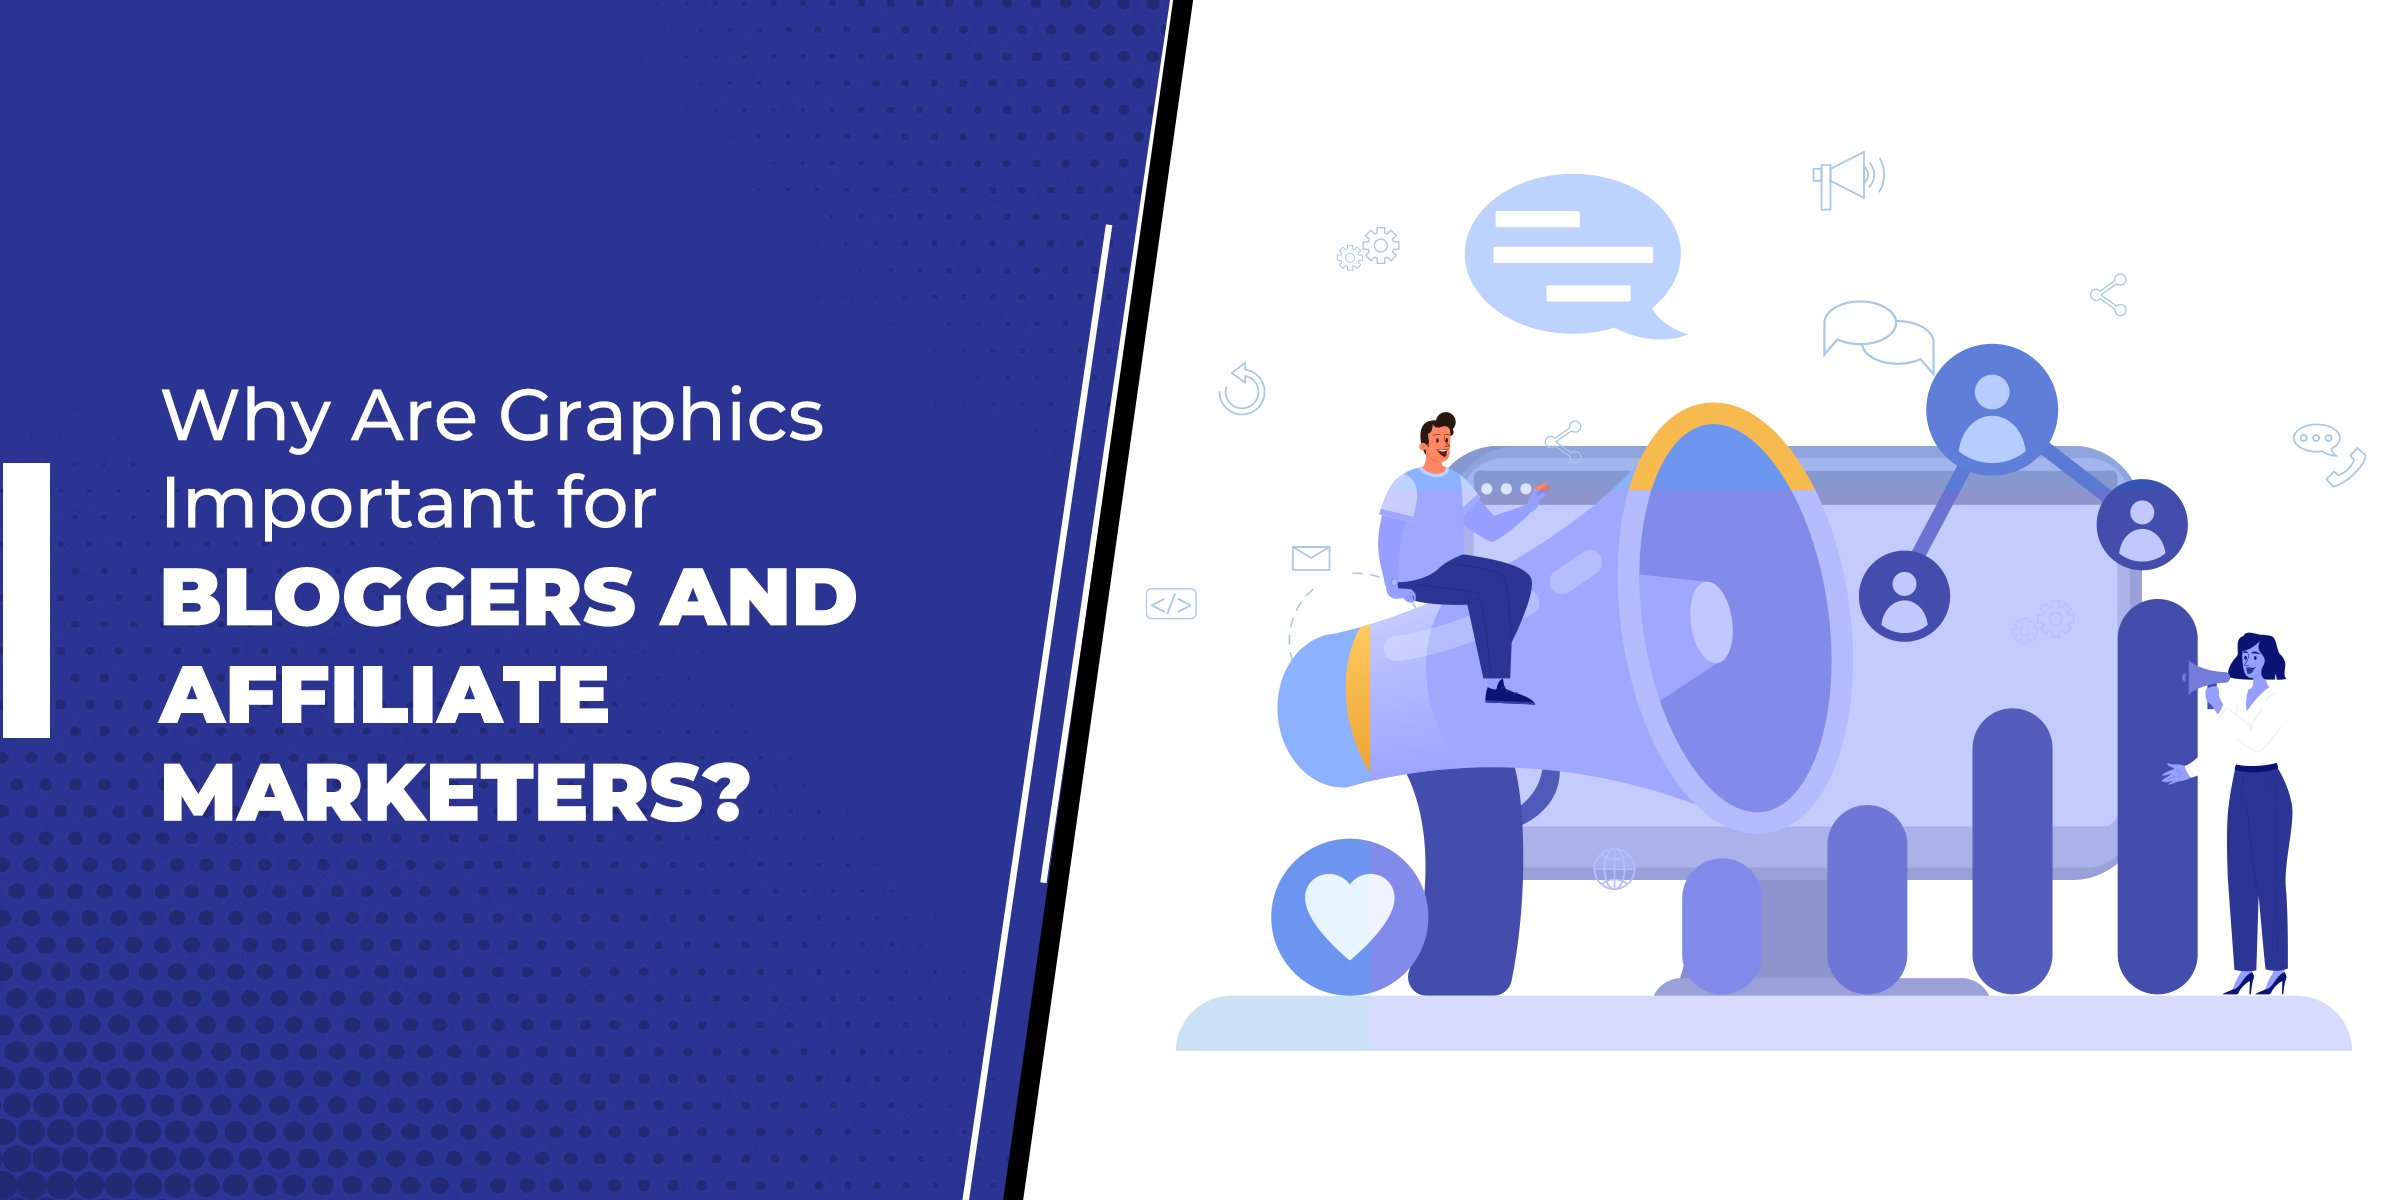 Why Are Graphics Important for Bloggers?